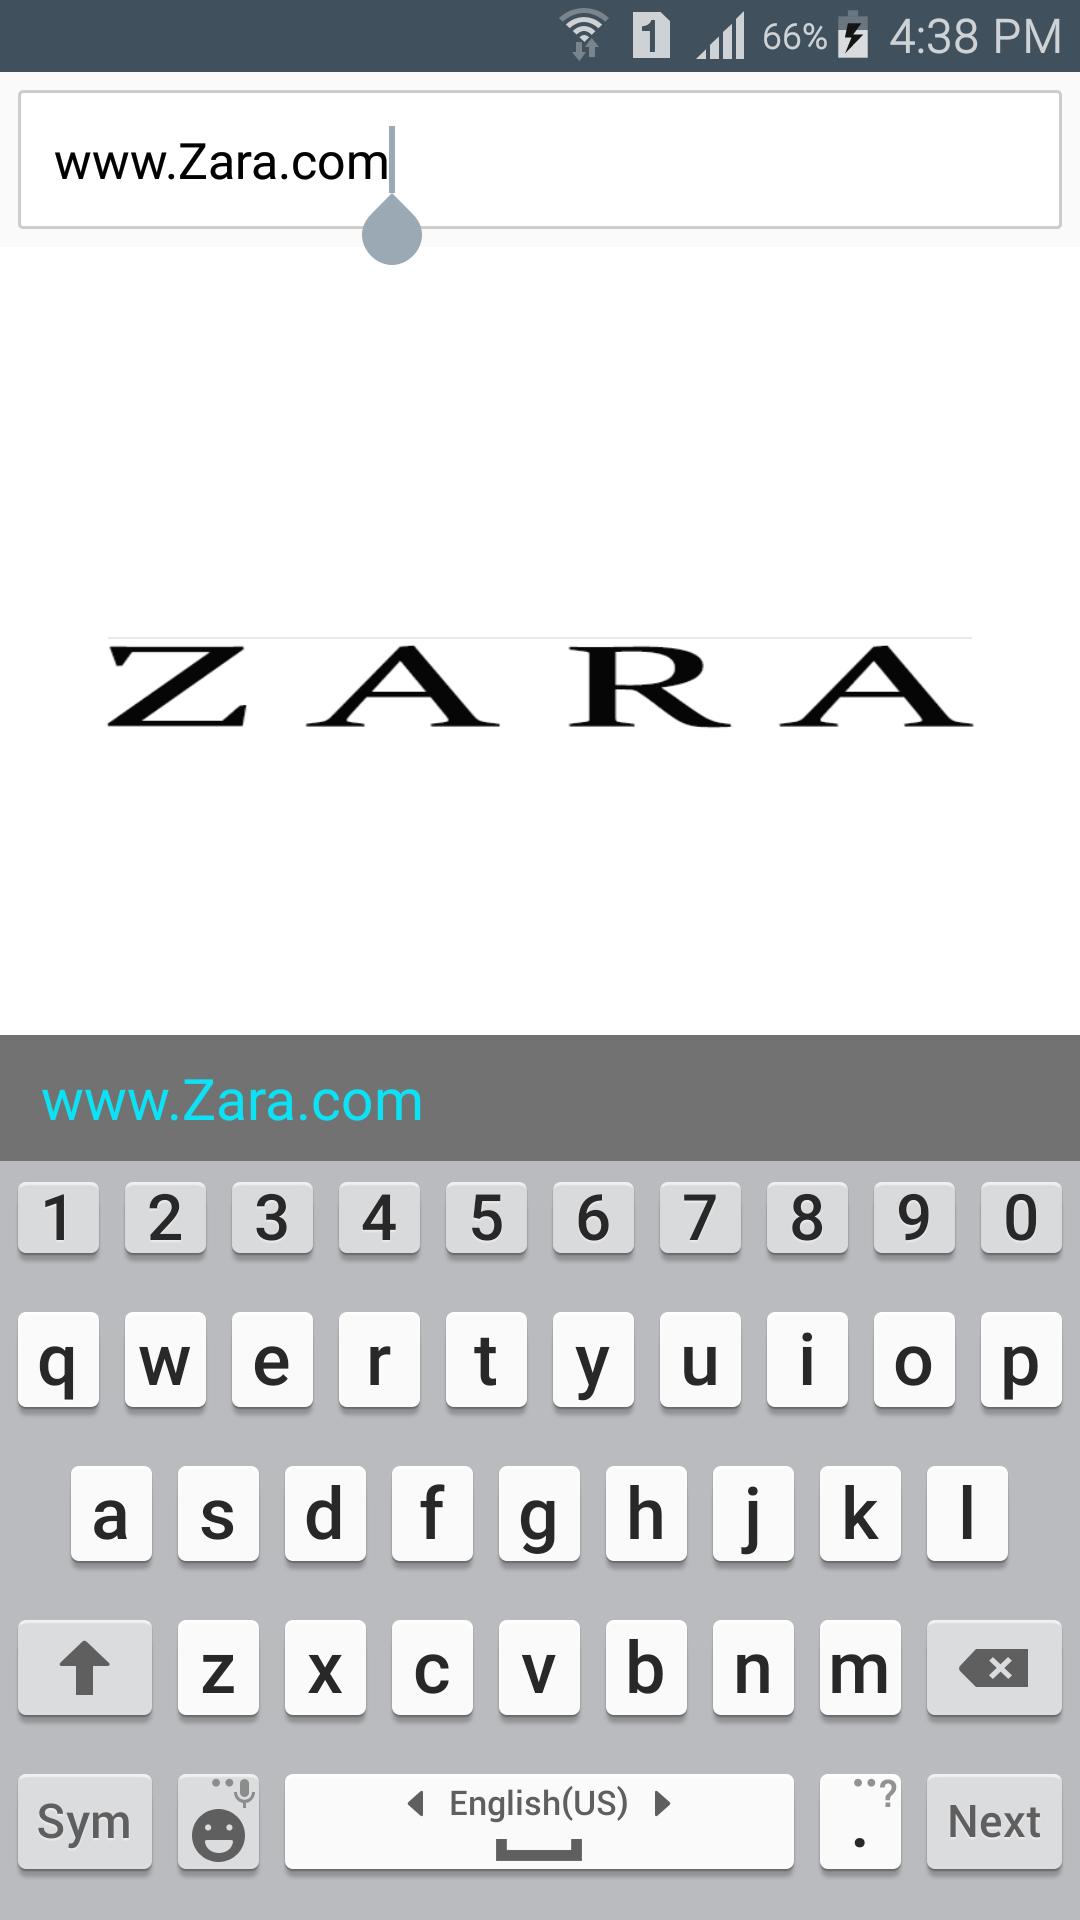 Zara Shop for Android - APK Download